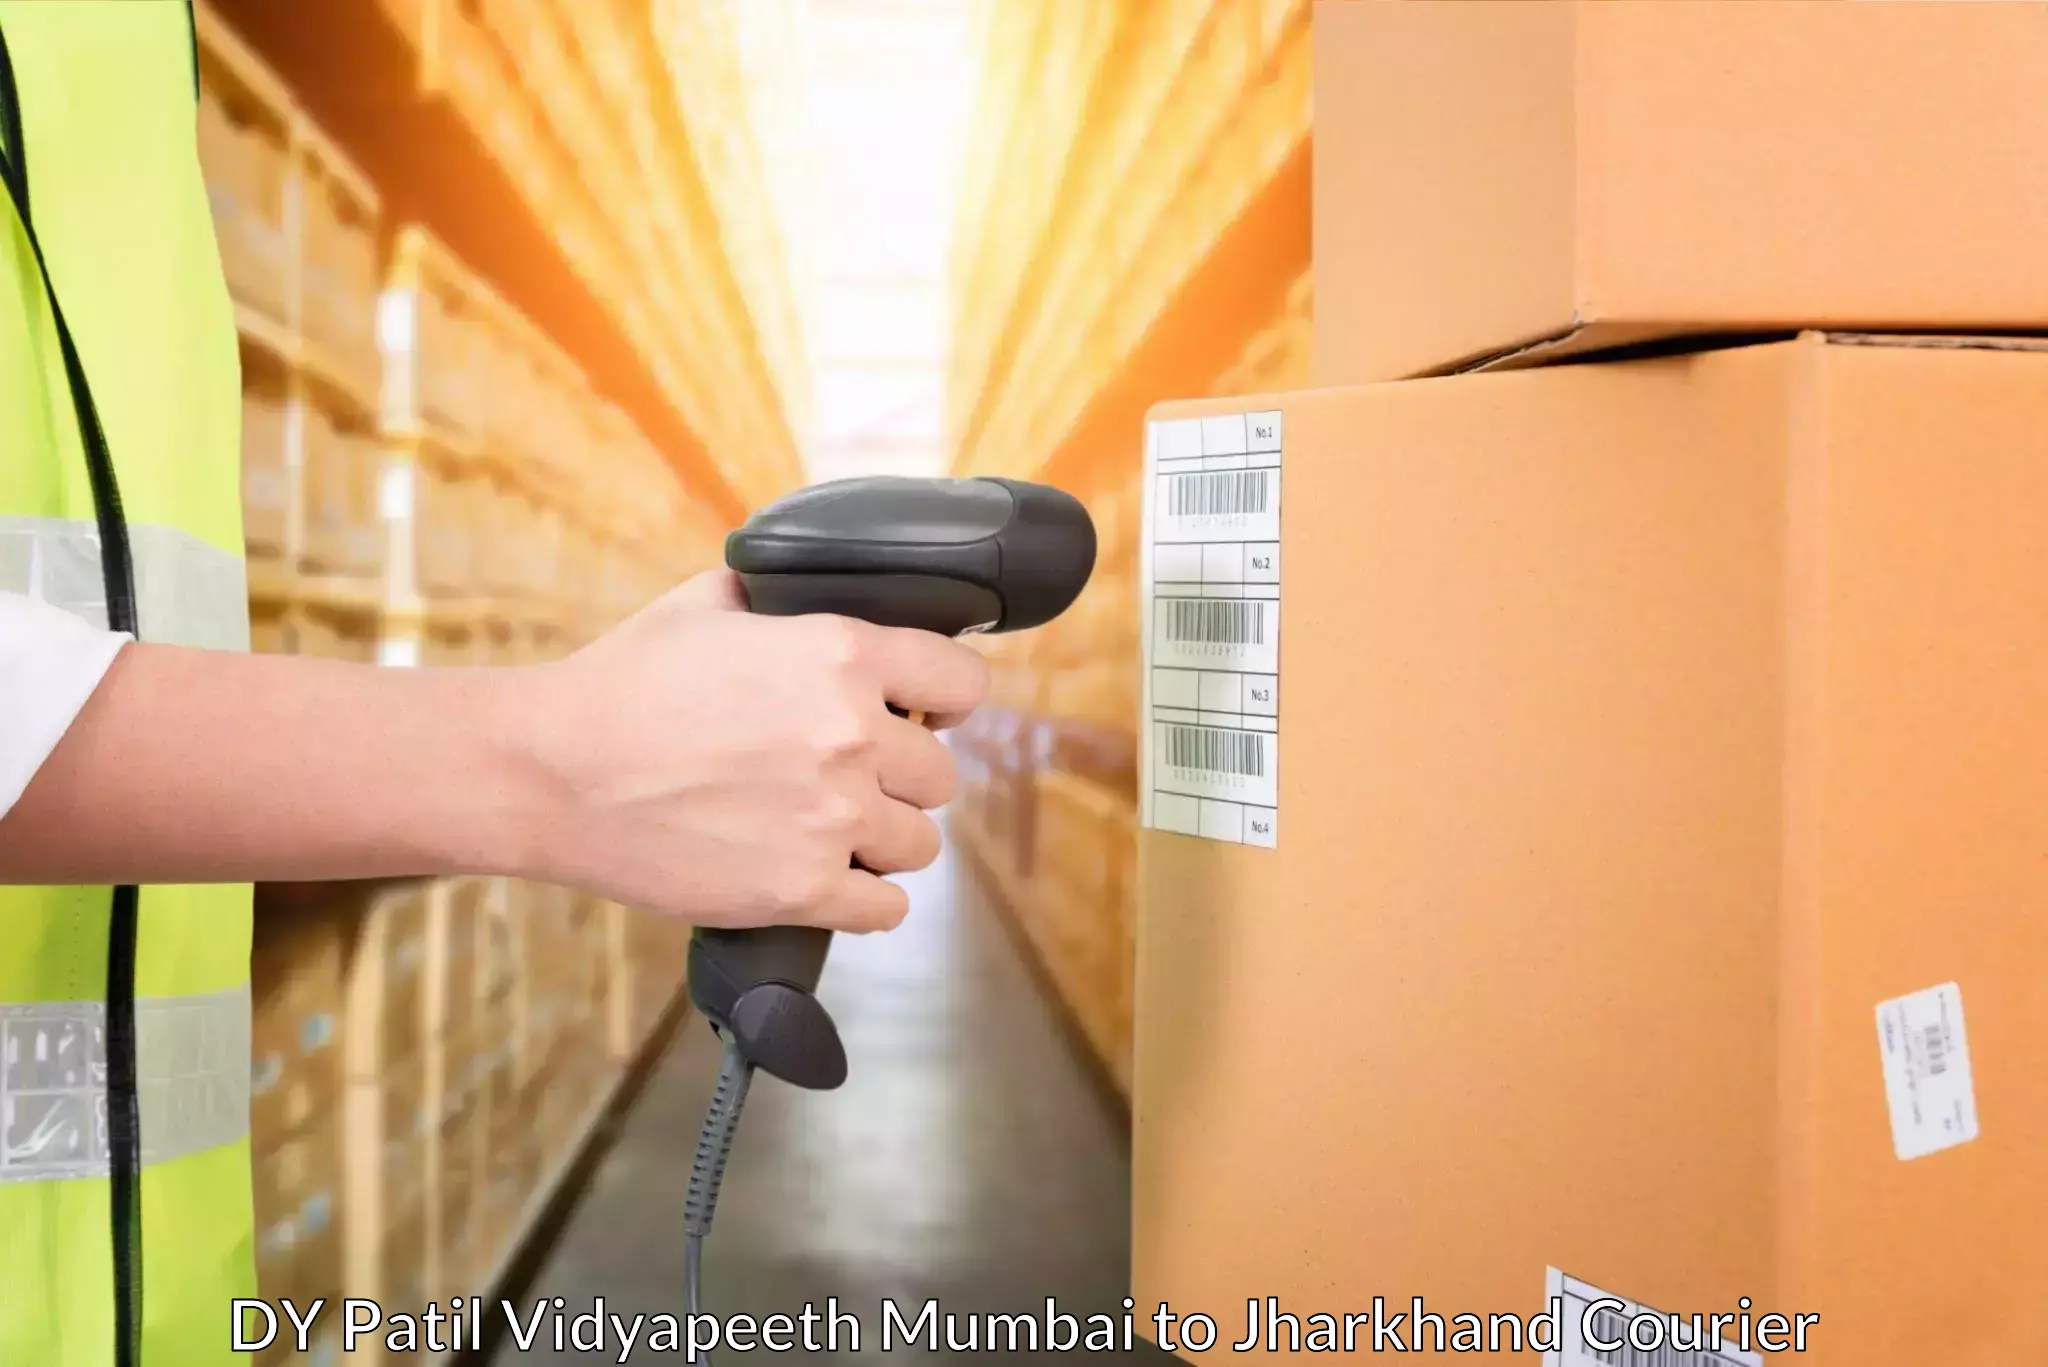 State-of-the-art courier technology in DY Patil Vidyapeeth Mumbai to Birla Institute of Technology Ranchi